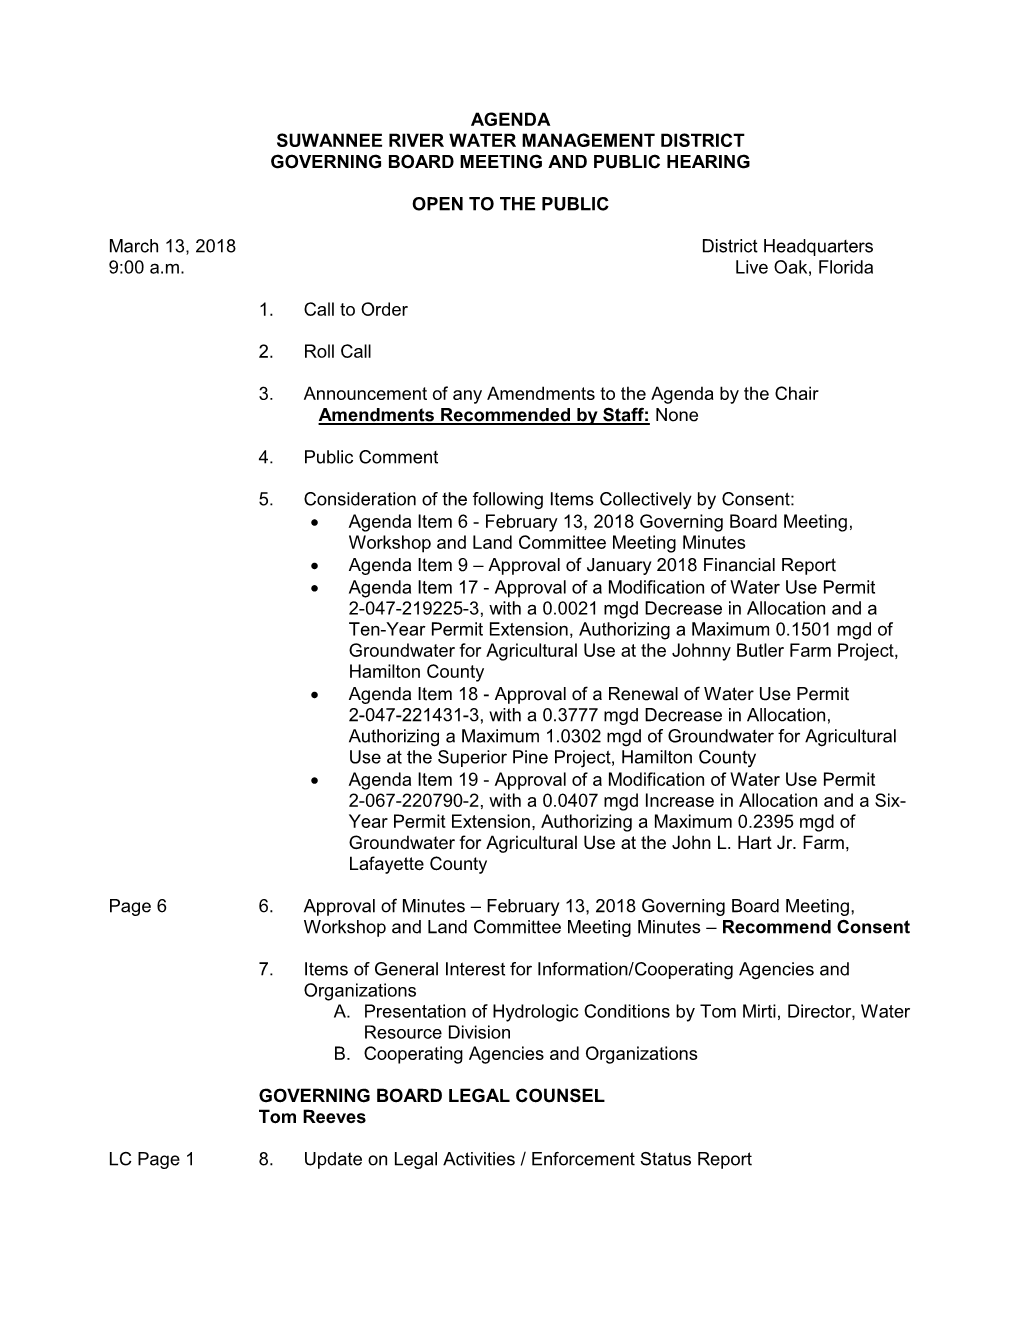 Agenda Suwannee River Water Management District Governing Board Meeting and Public Hearing